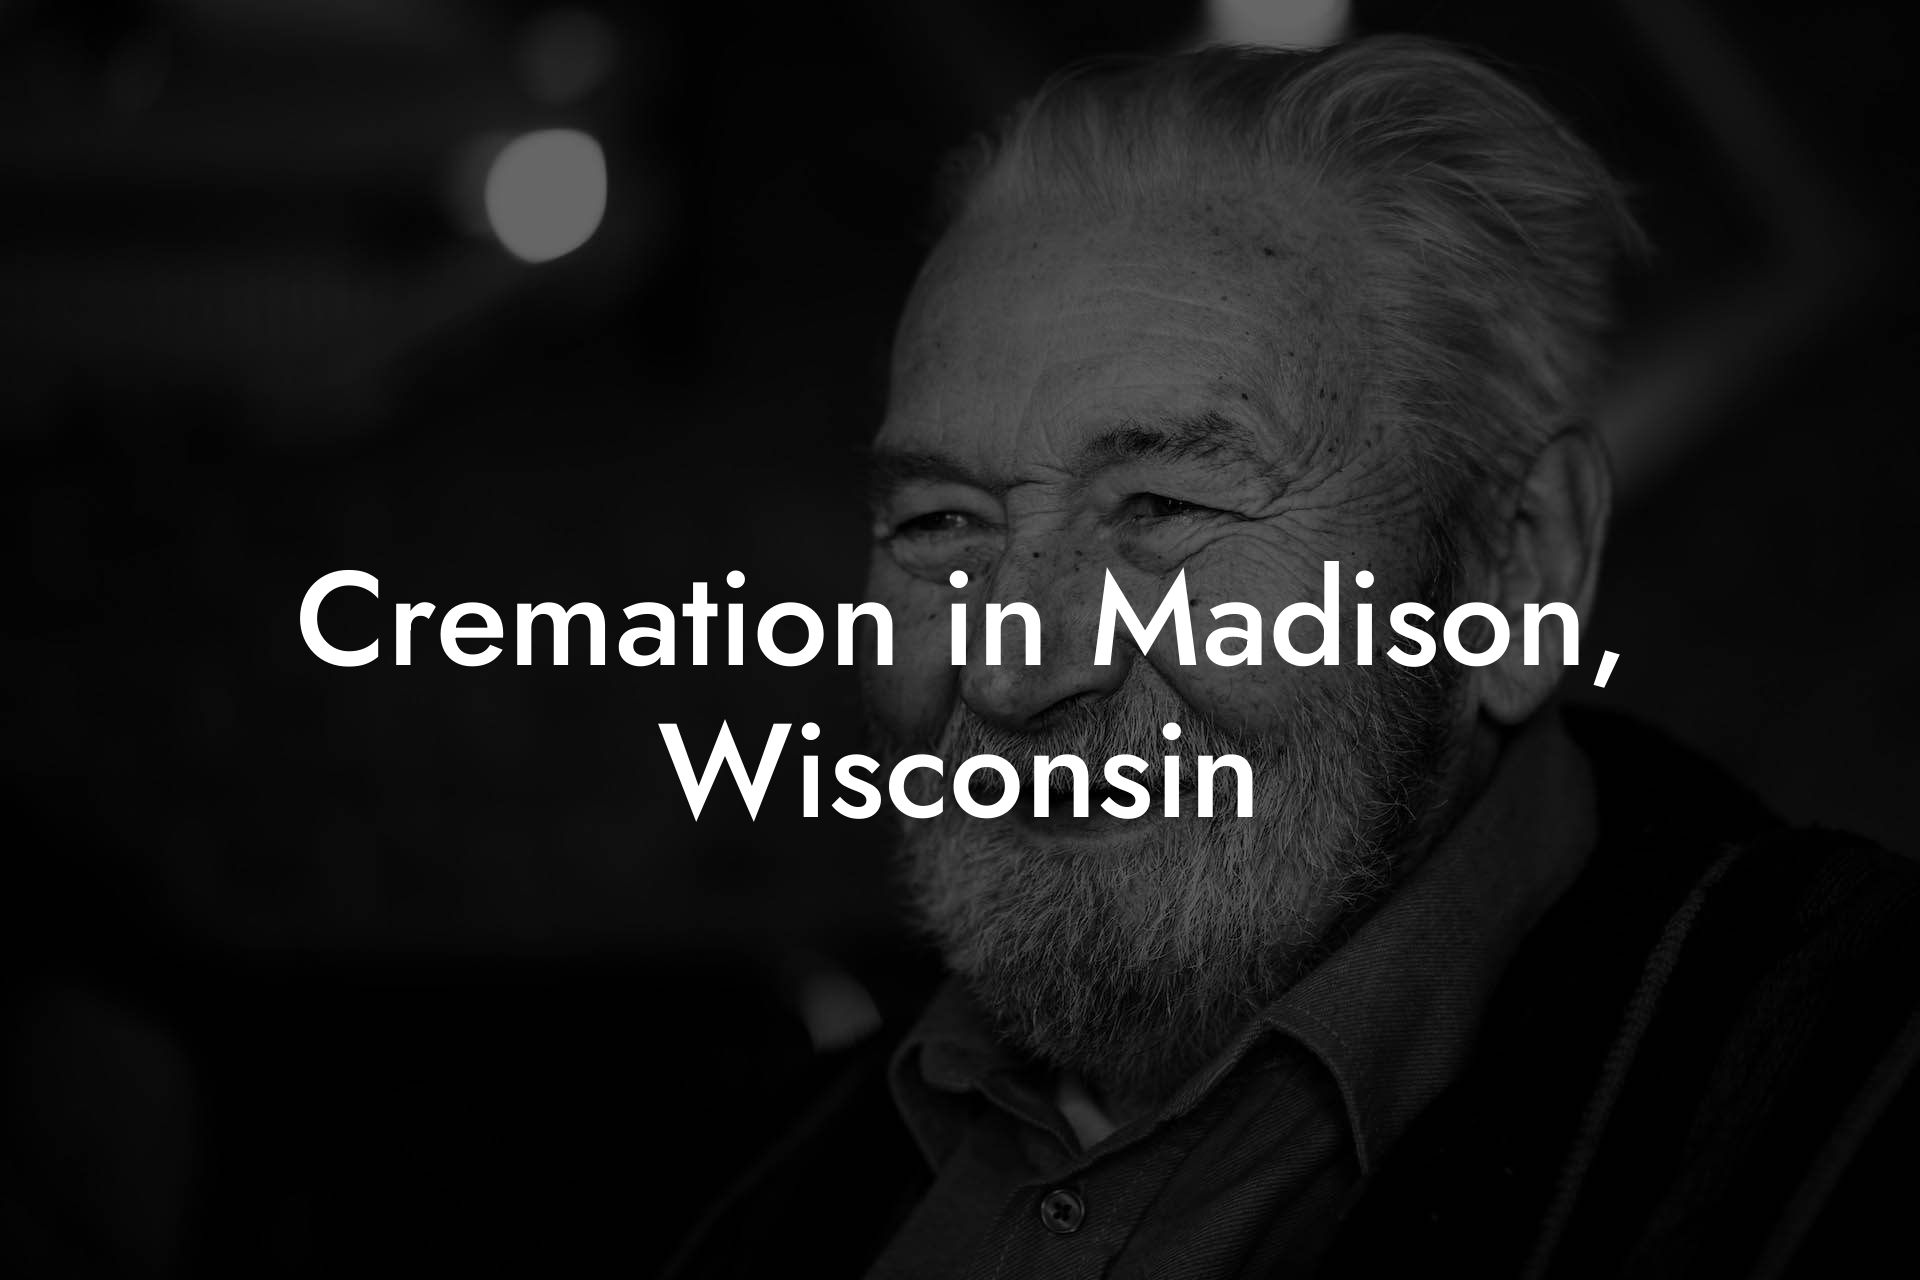 Cremation in Madison, Wisconsin